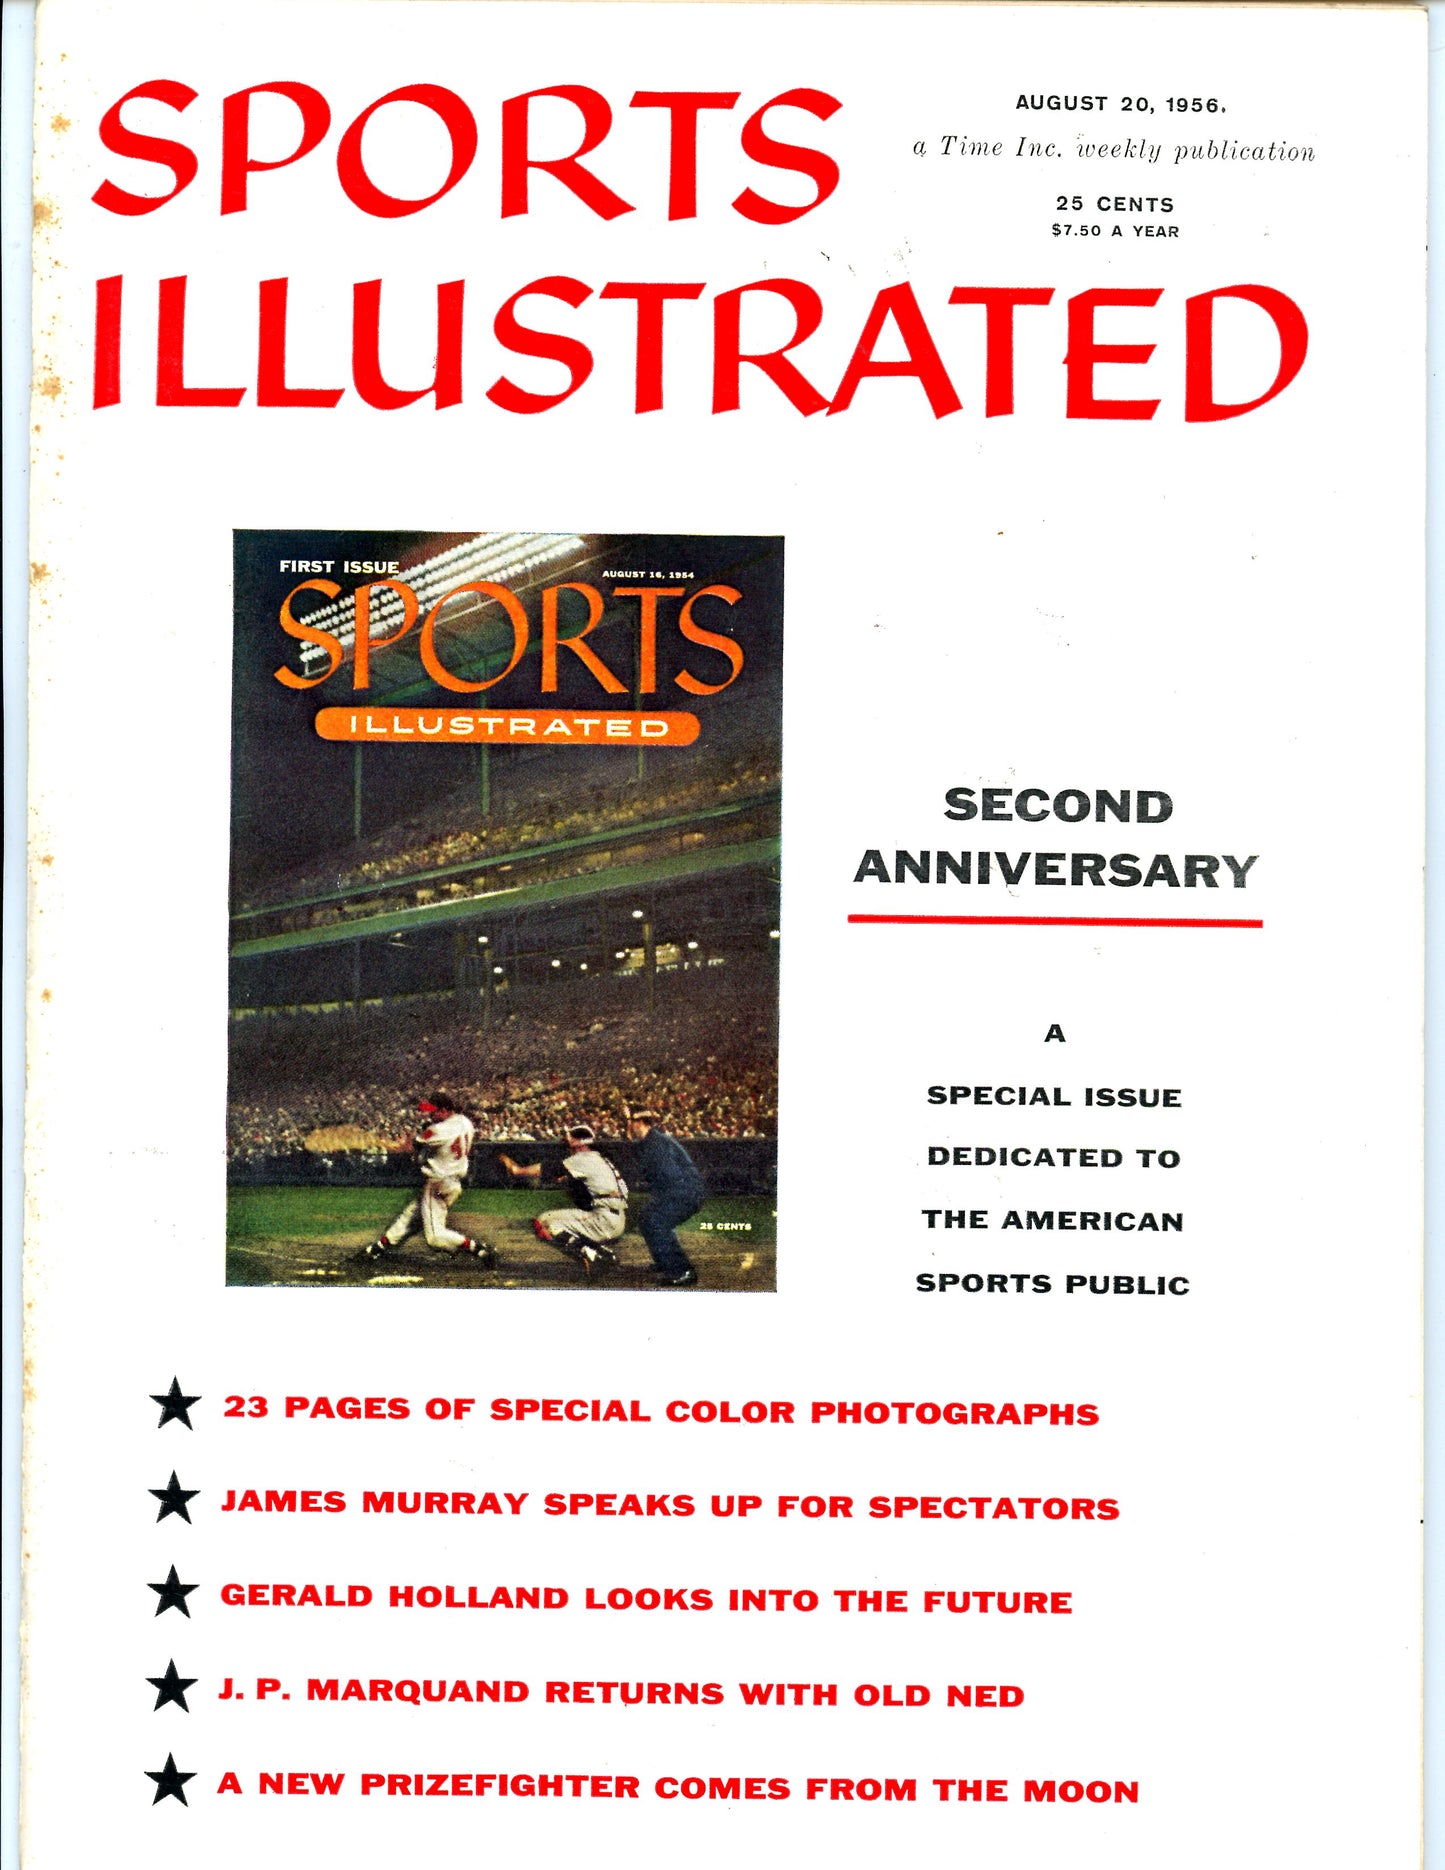 Sports Illustrated Vintage Magazine Rare Newsstand Edition (August 20, 1956) Second Anniversary